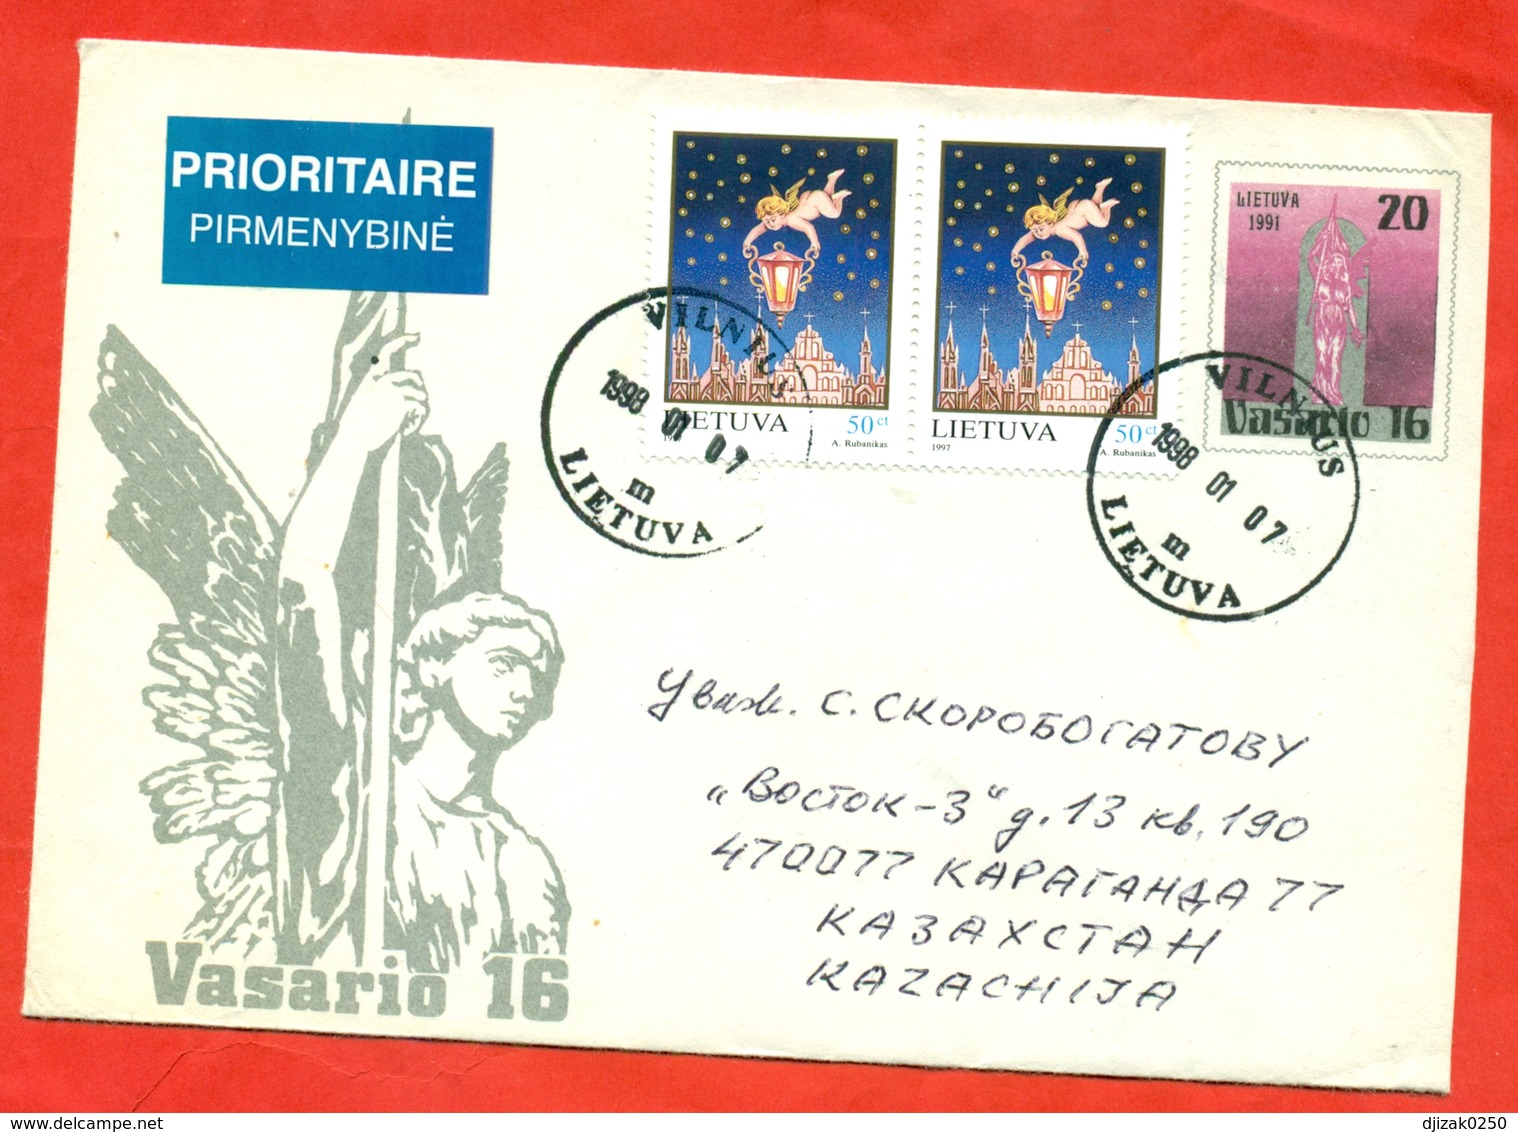 Lithuania 1991. The Envelope Printed Original Stamp Actually Passed The Mail. - Lithuania